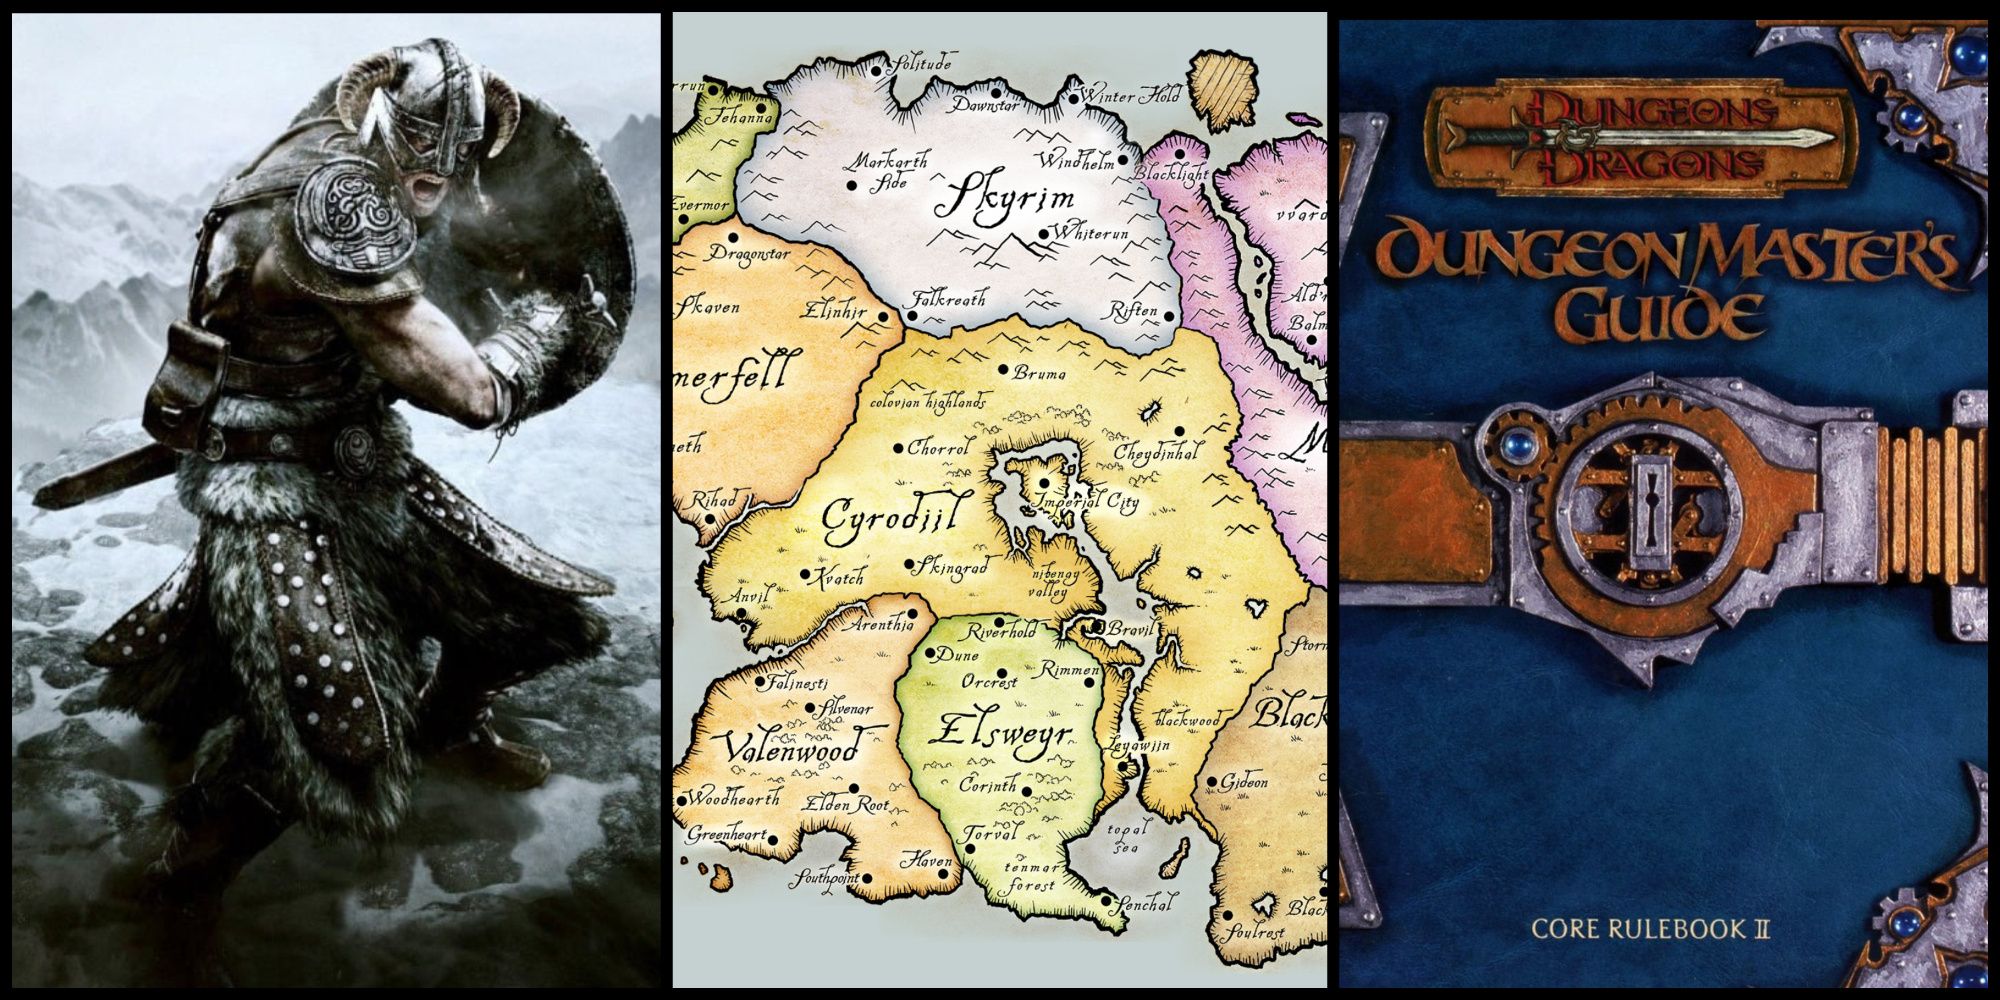 The Dragonborn, A Map of Tamriel and the D&D Dungeon Master Guide.